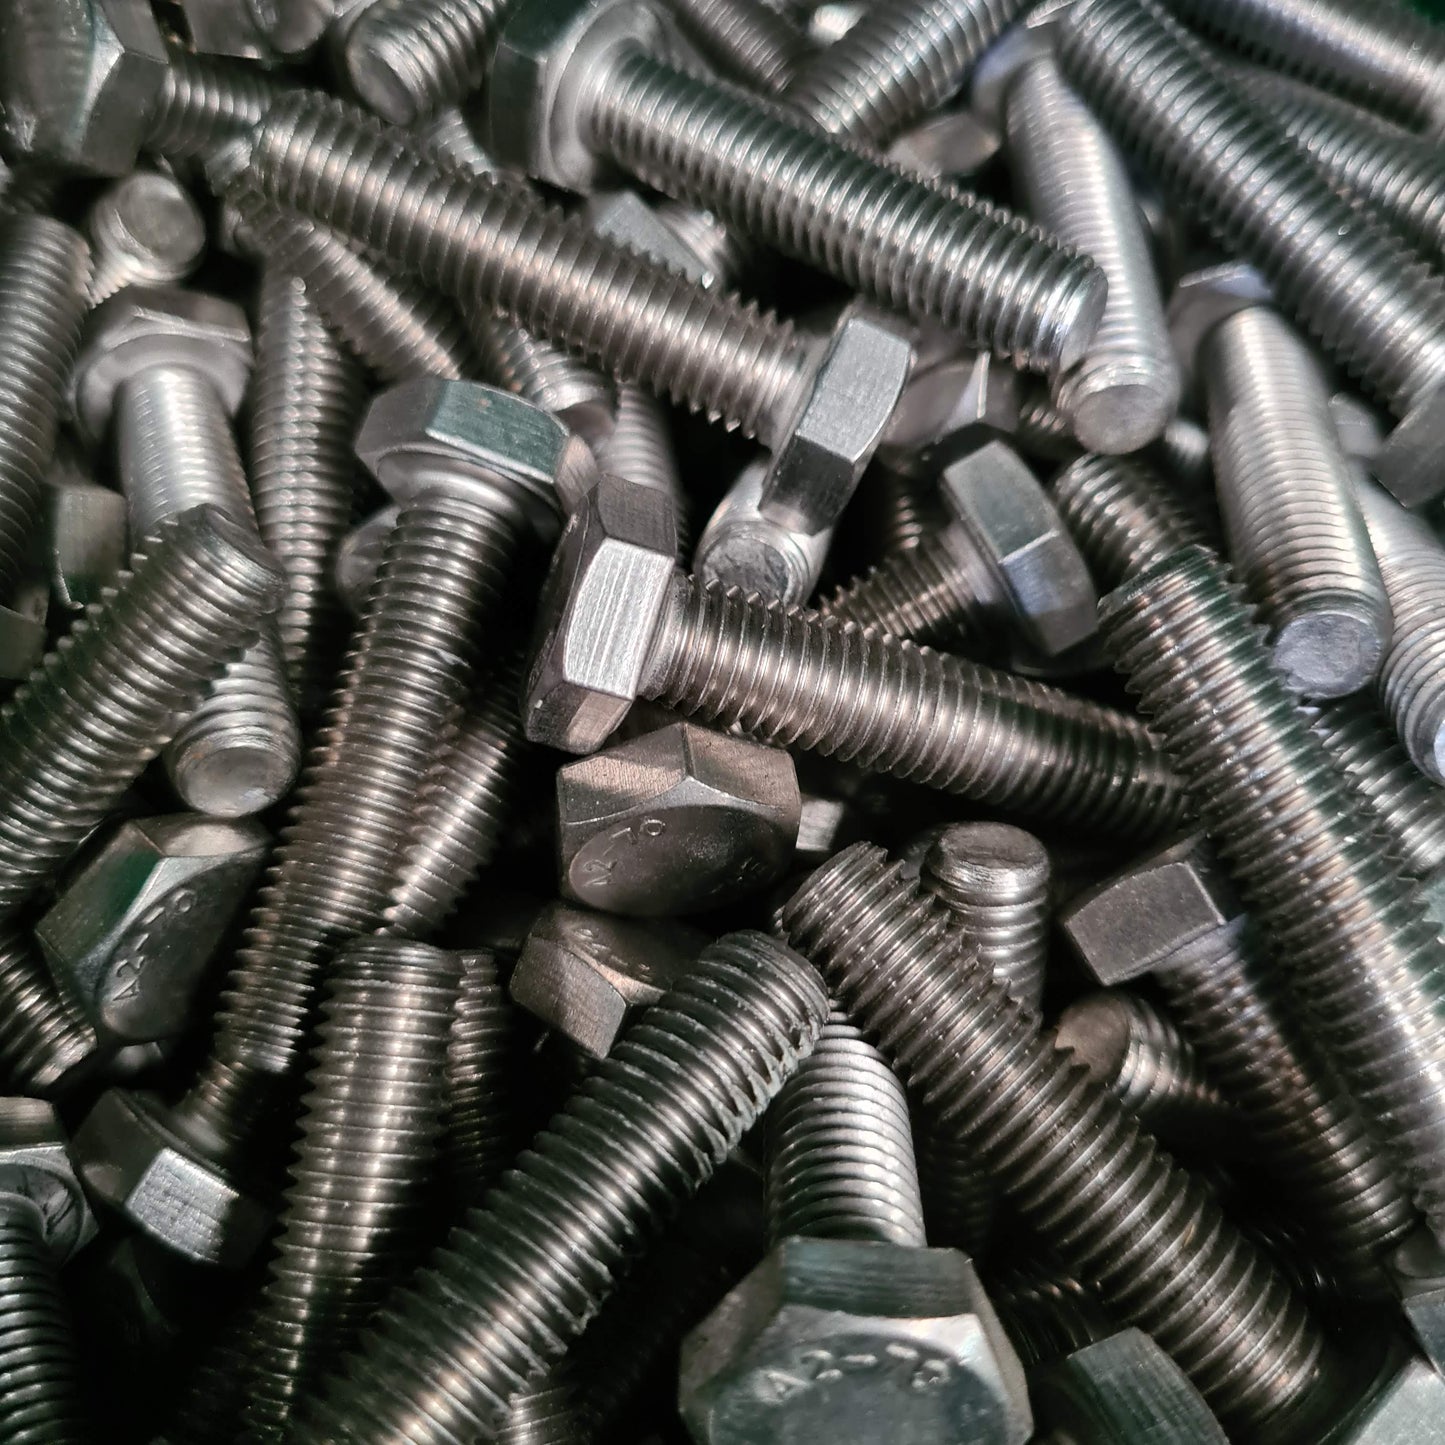 M6 Set Screw available in 316 or 304 stainless steel and lengths from 10mm to 70mm